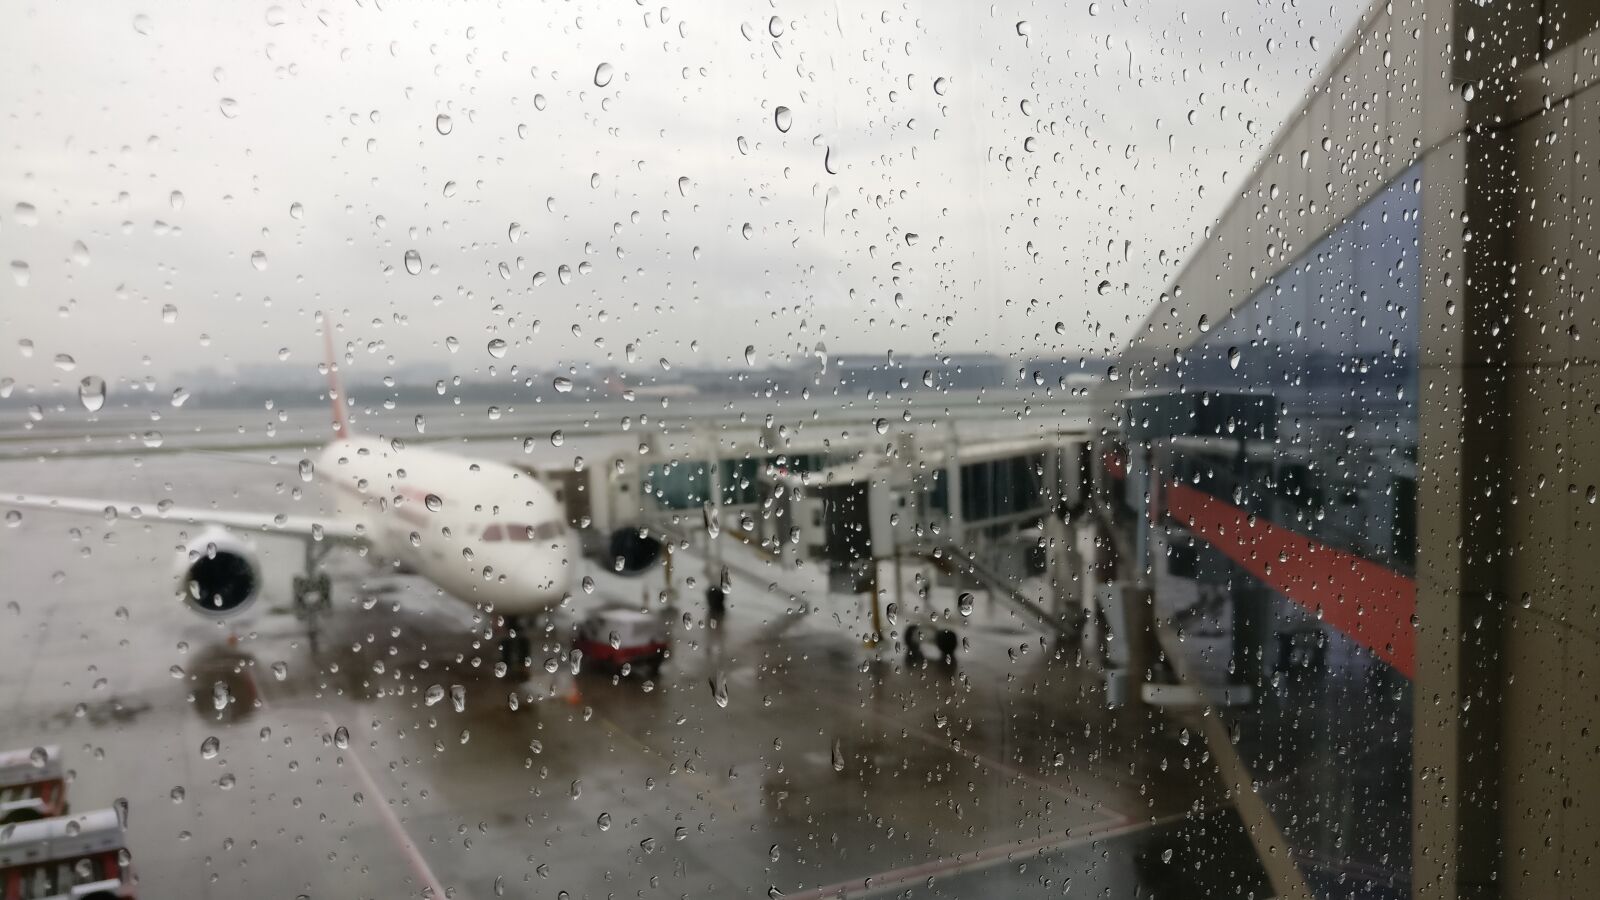 OnePlus A3003 sample photo. Airport, india, raining photography